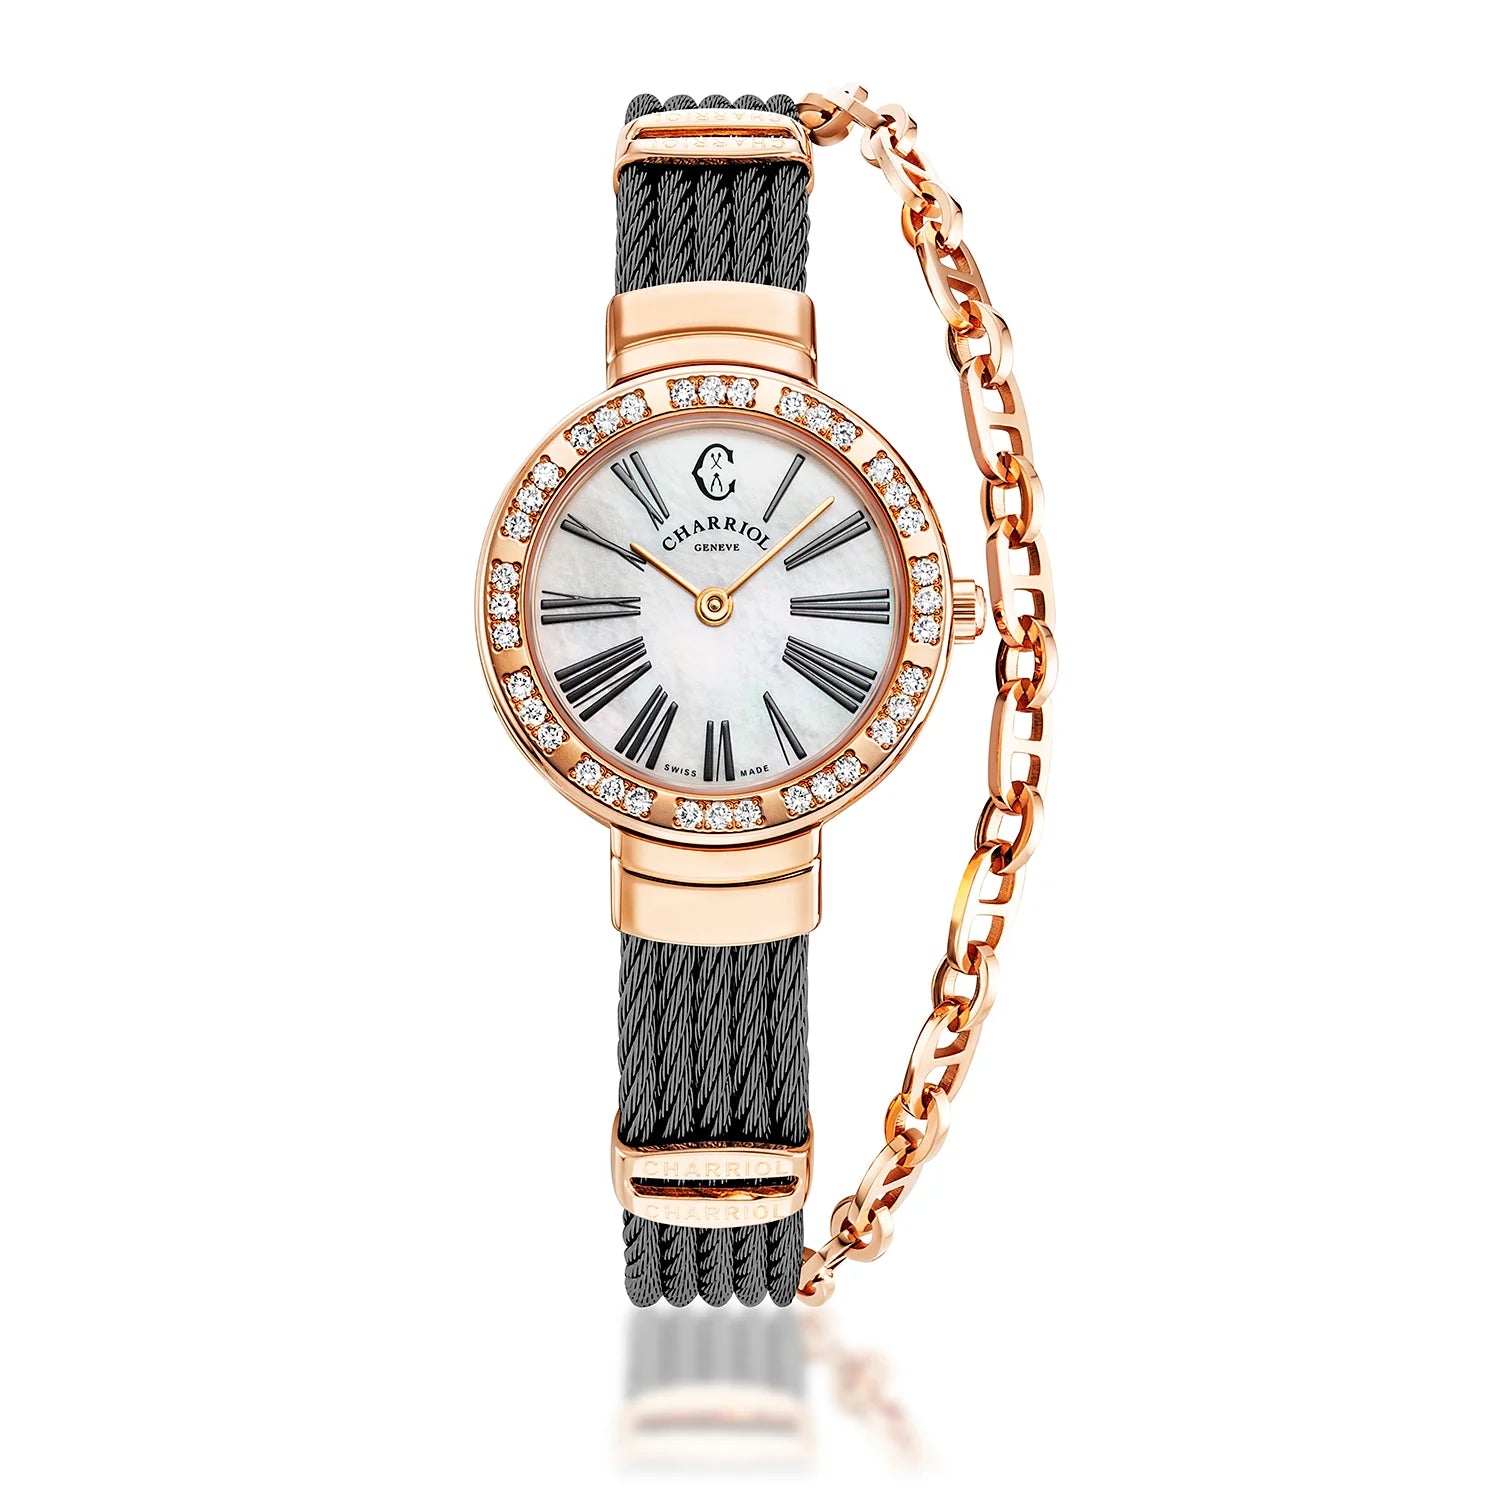 ST TROPEZ, 25MM, QUARTZ CALIBRE, WHITE MOTHER-OF-PEARL DIAL WITH ROMAN NUMERALS, ROSE GOLD PVD WITH 36 DIAMONDS BEZEL, STEEL BLACK PVD CABLE BRACELET - Charriol Geneve -  Watch